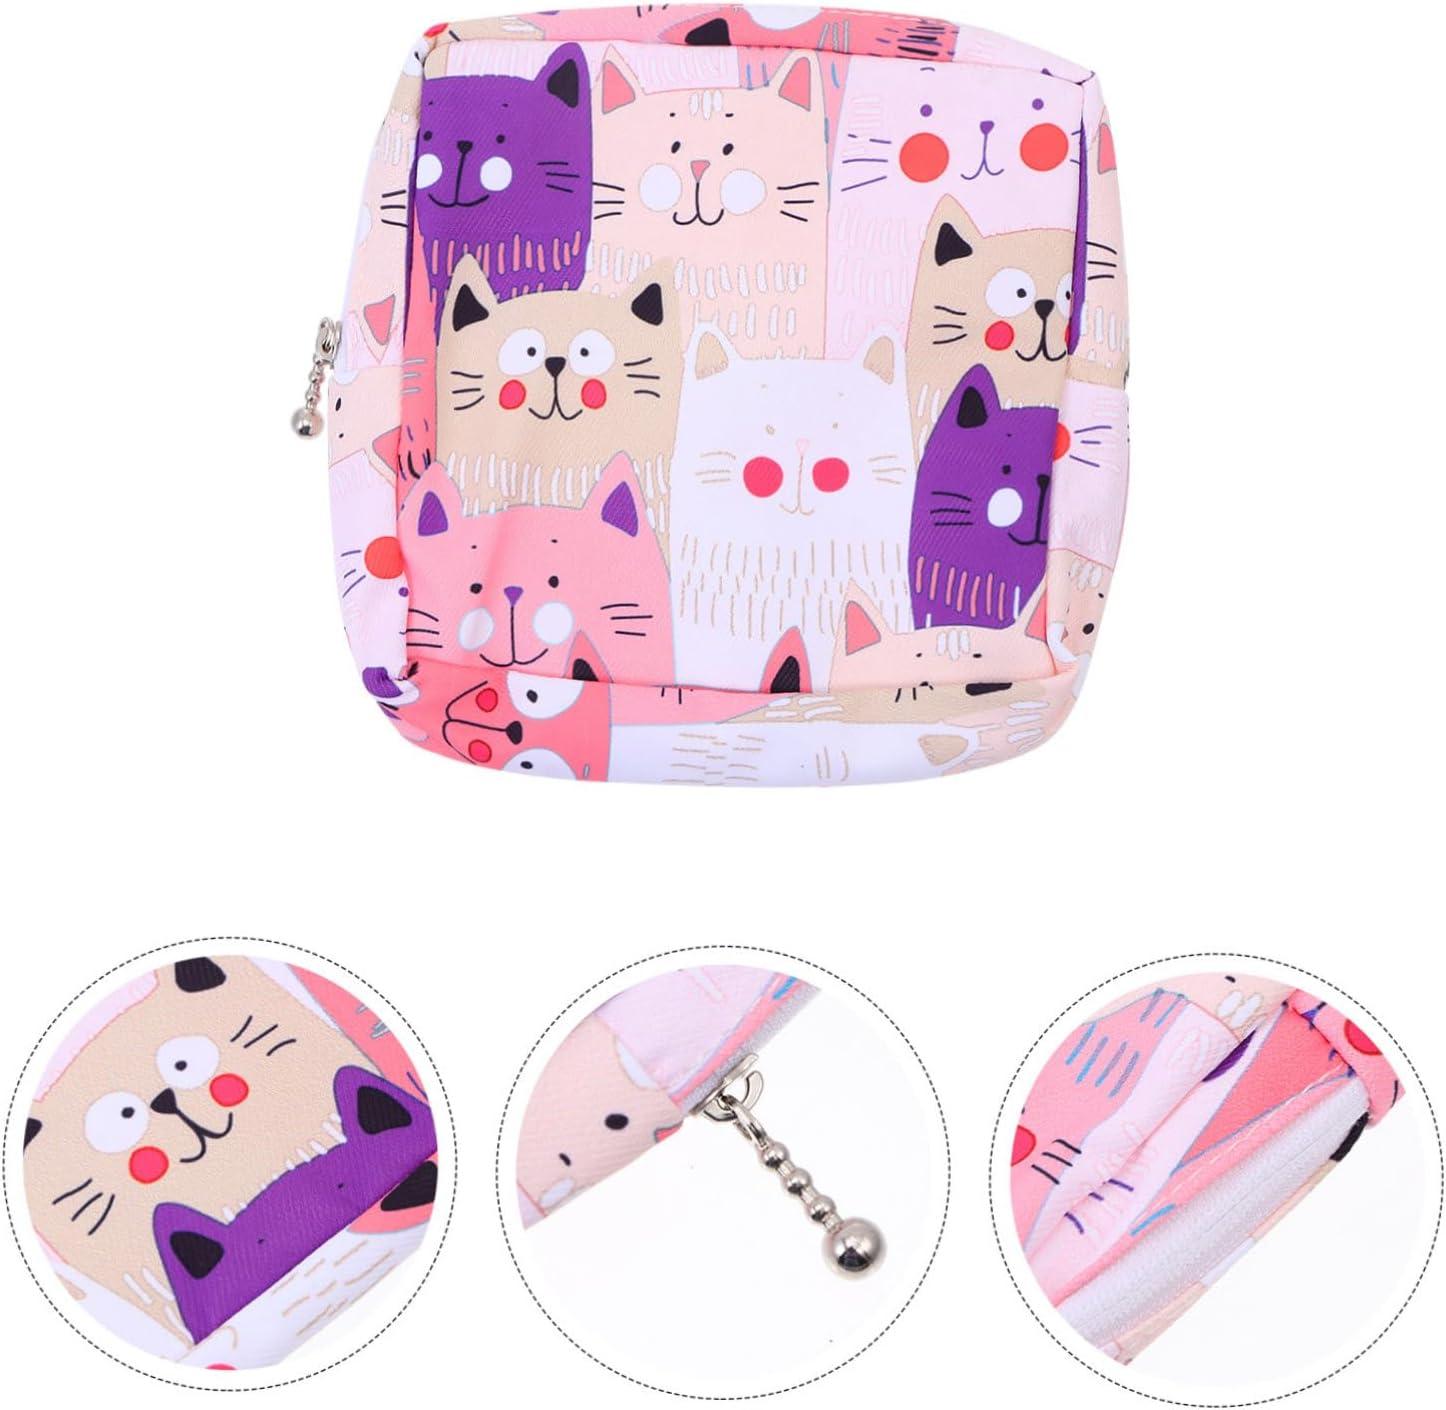 Princess Mini Crossbody Bag For Girls Kawaii Kids Mini Purse With Coin  Pouch And Toddler Wallet Perfect Gift From Angelgirlshe111, $5.1 |  DHgate.Com